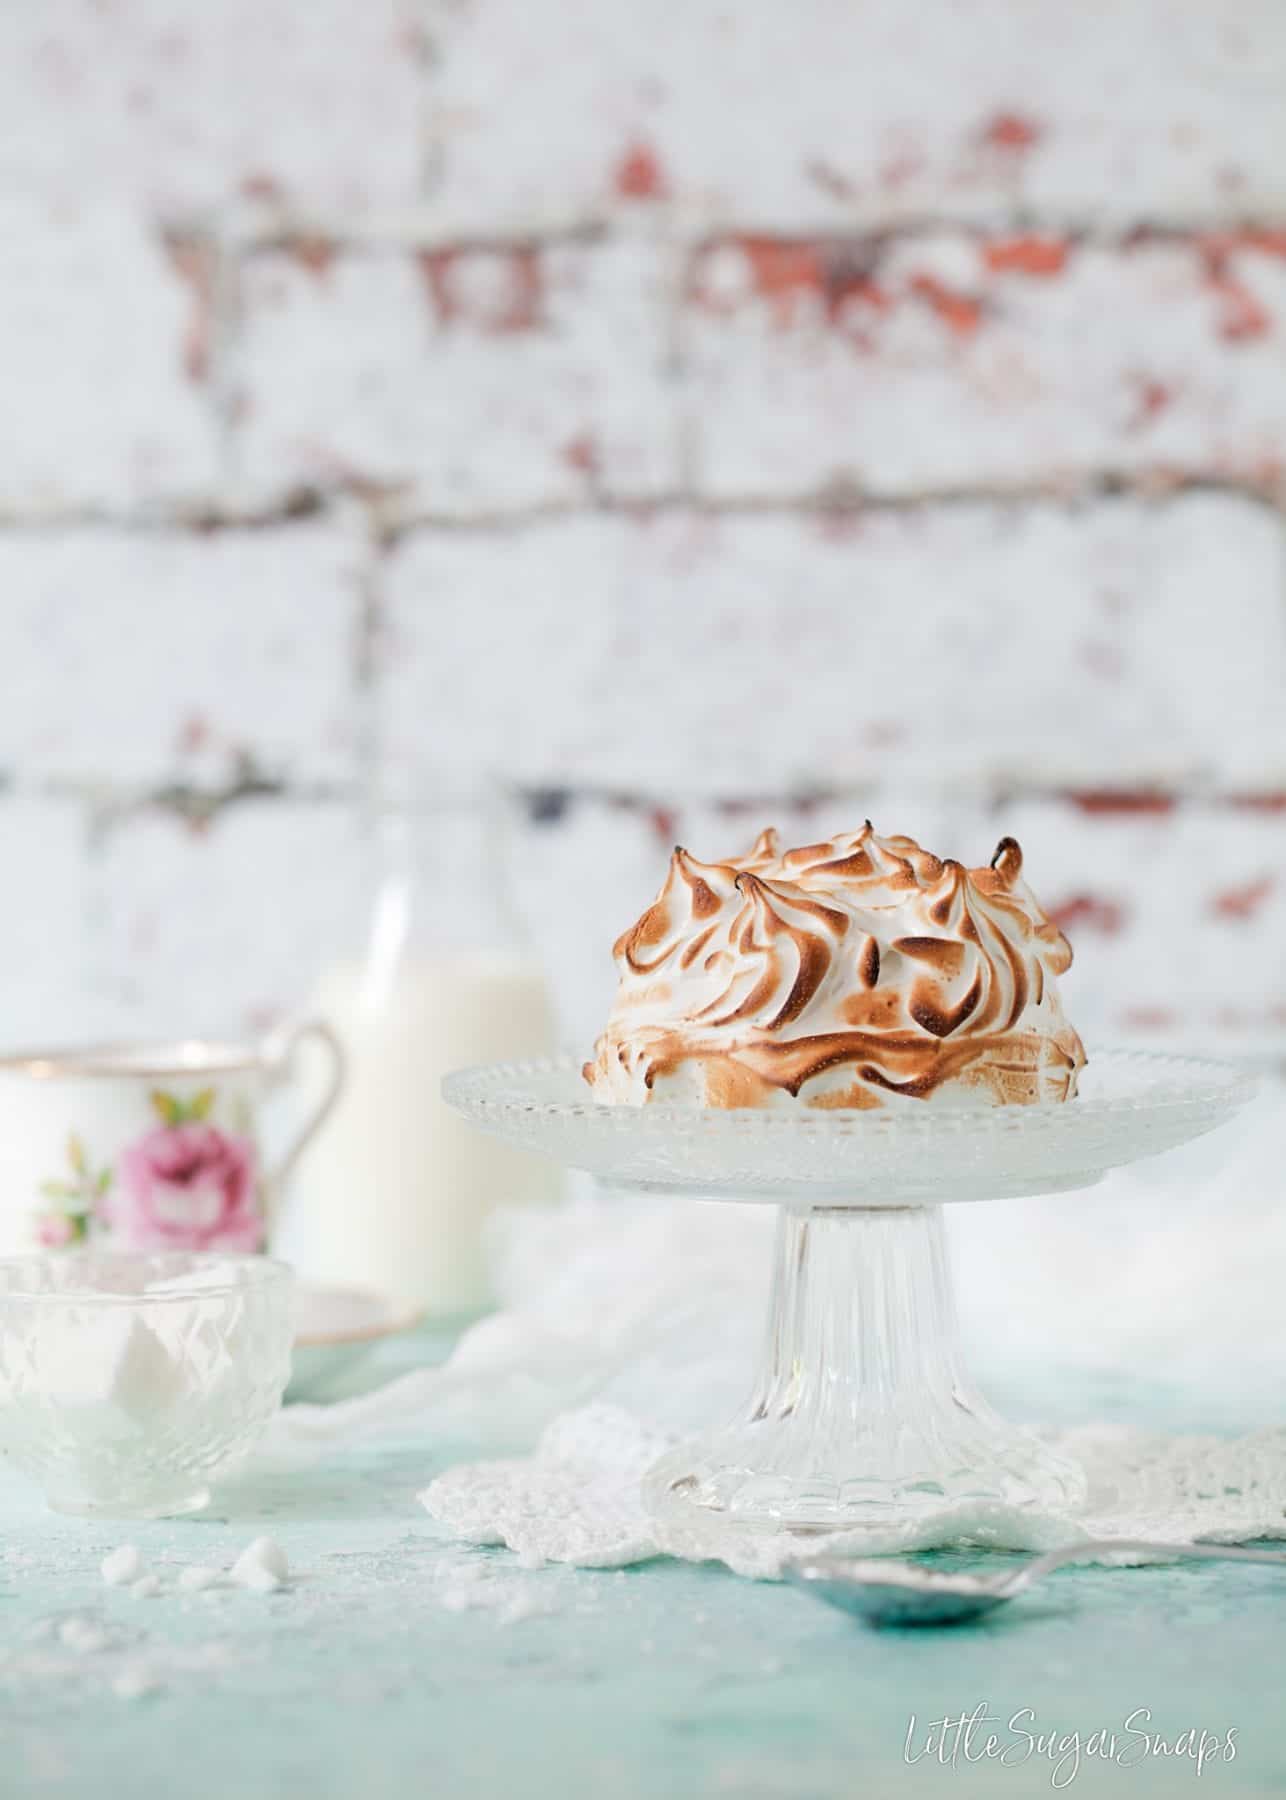 Toasted meringue dessert on a cake stand